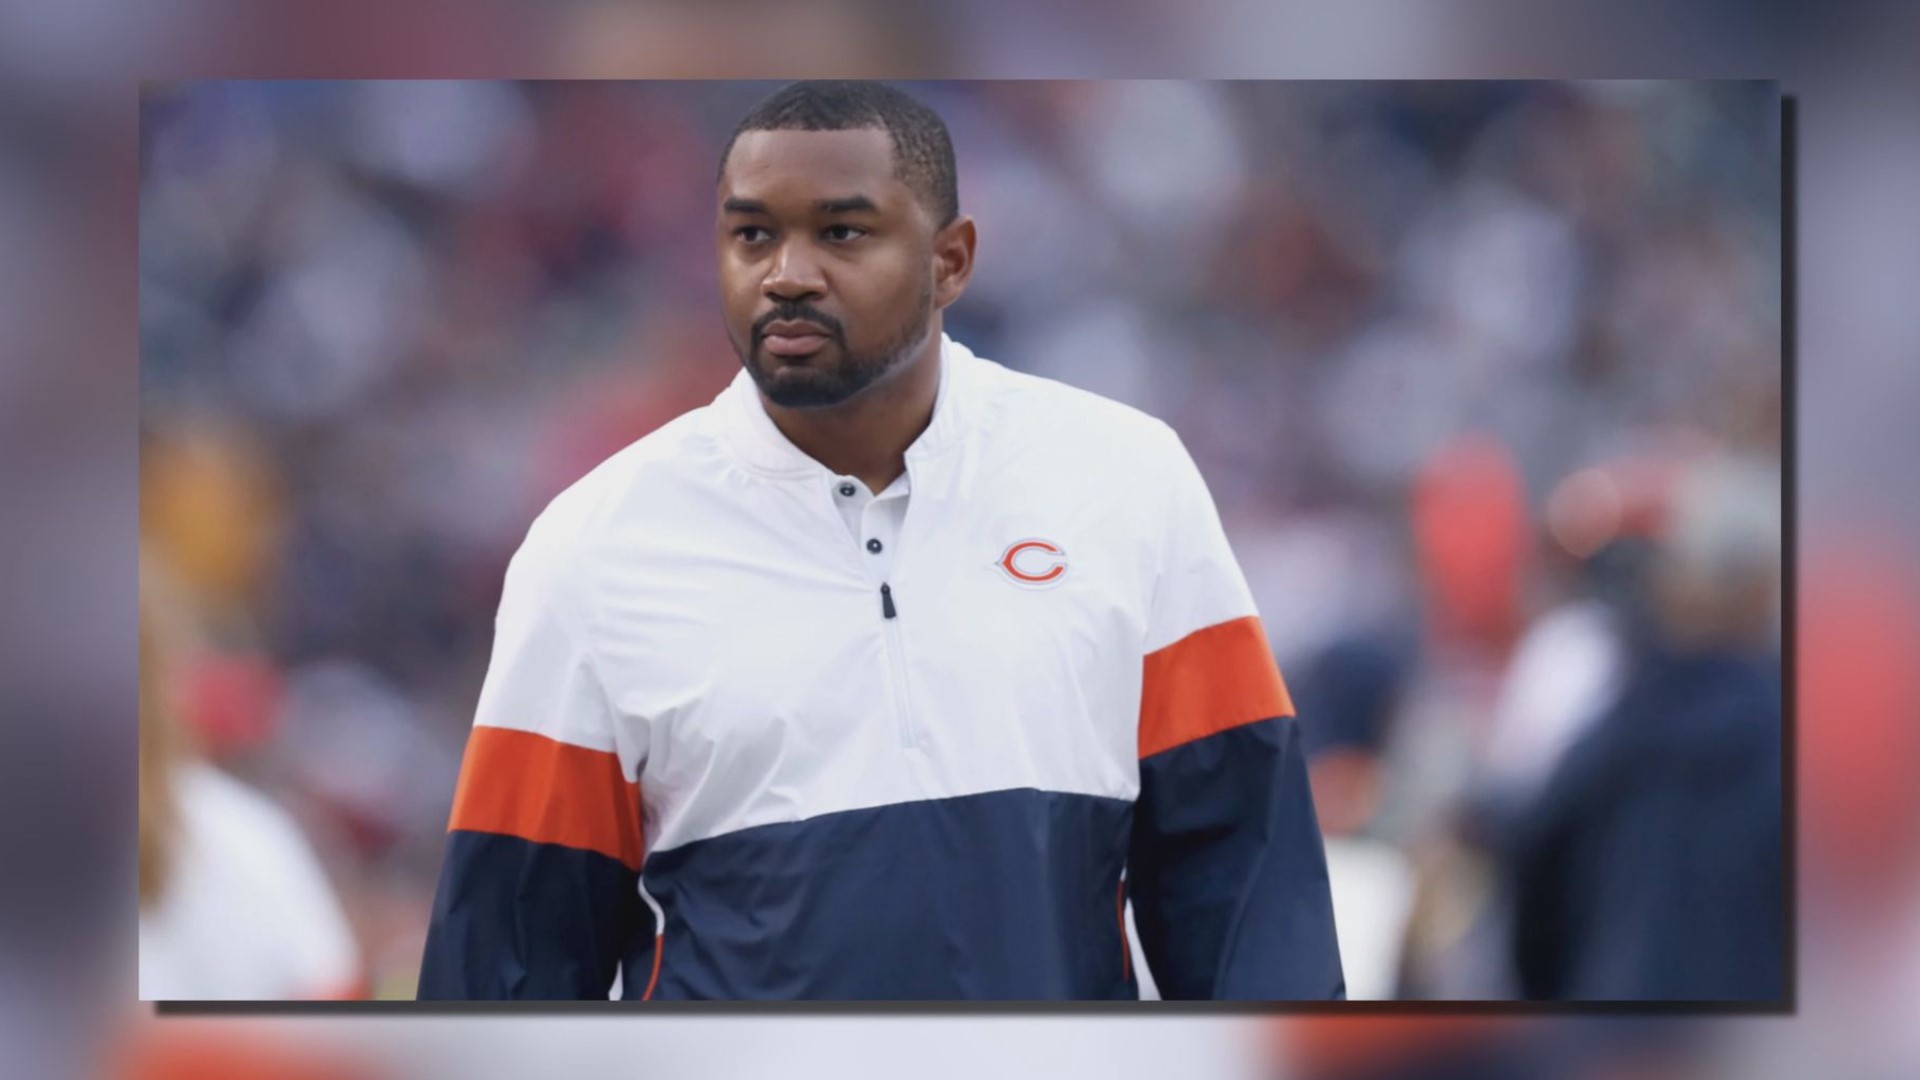 Many of the lessons Aaron Clark learned growing up in Virginia Beach have paved the way for the successful career he’s had in his 7th year working with the Bears.